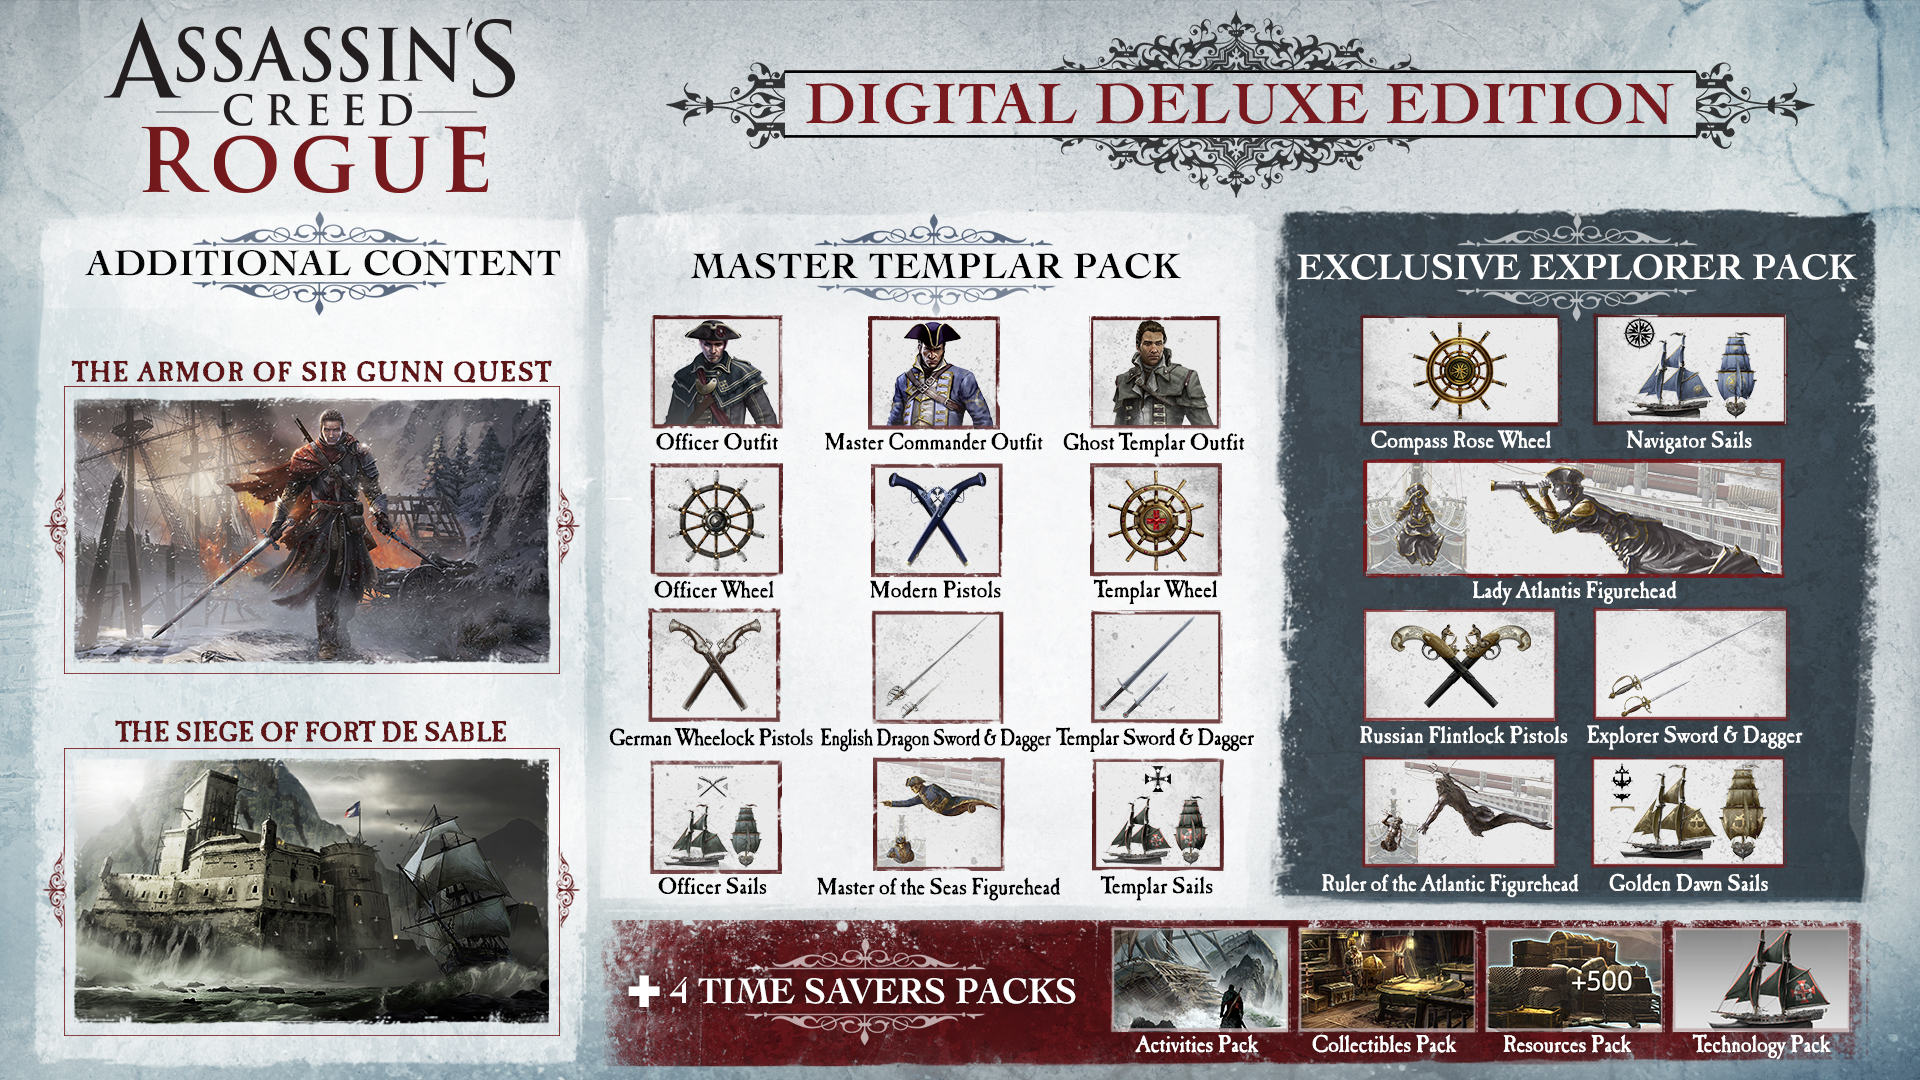 Assassin's Creed Rogue Guide - IGN